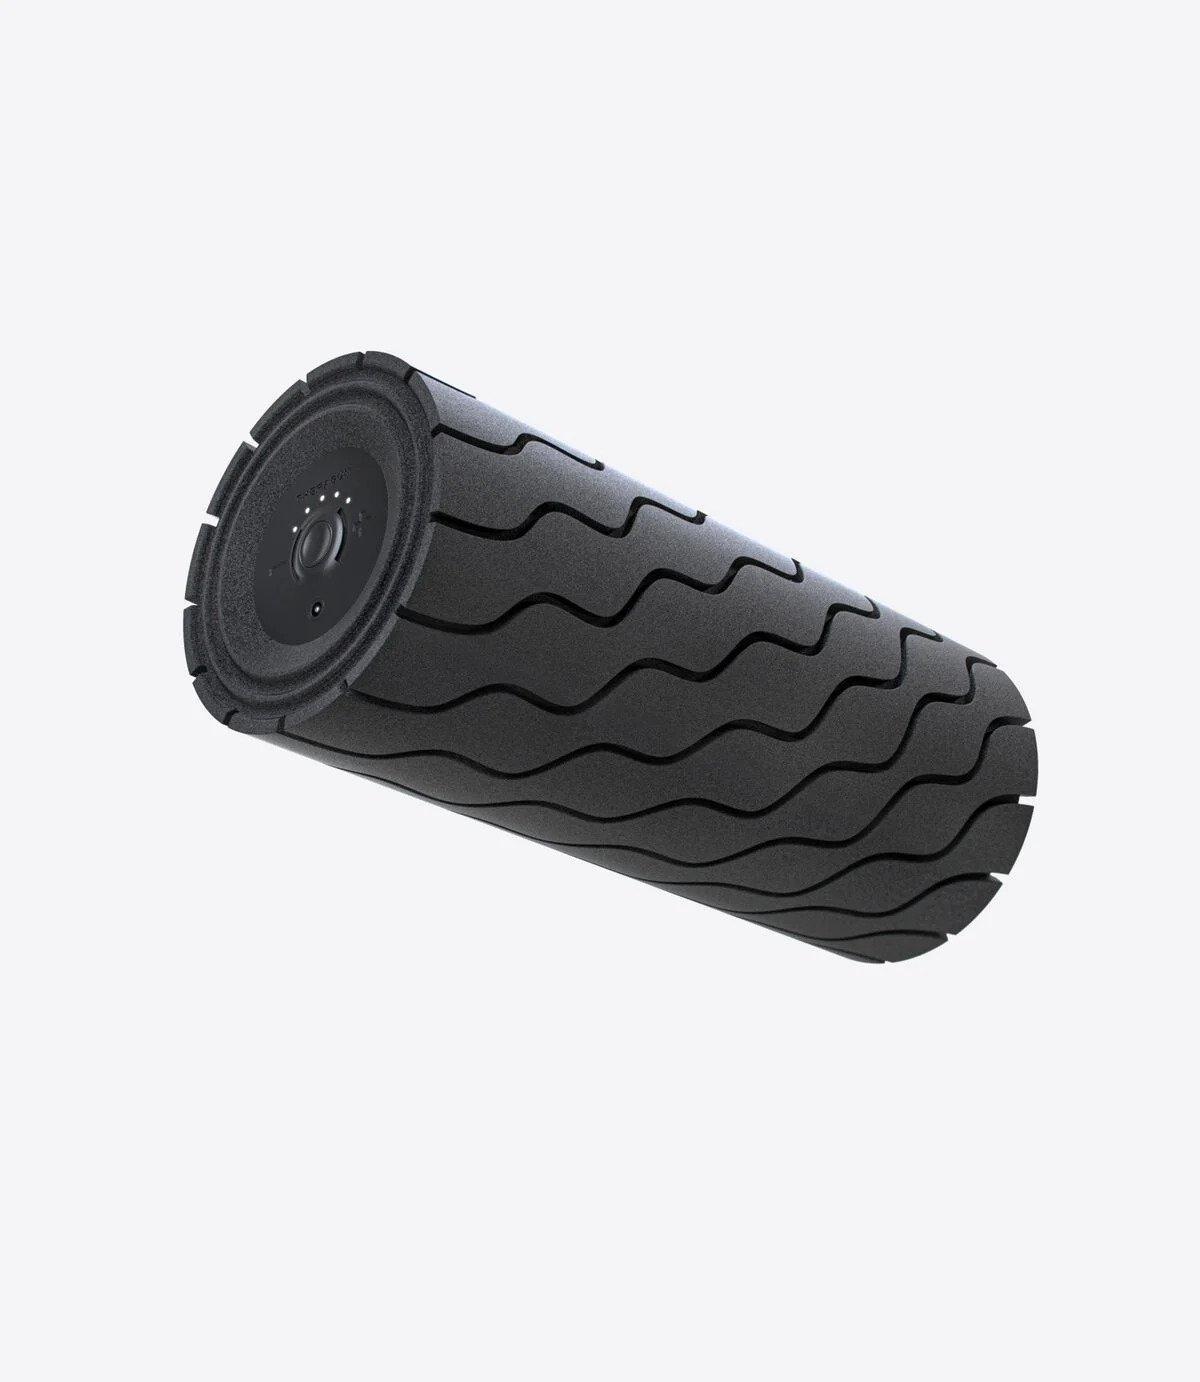 Therabody Wave Roller Vibrating Foam Roller - Muscle Lab